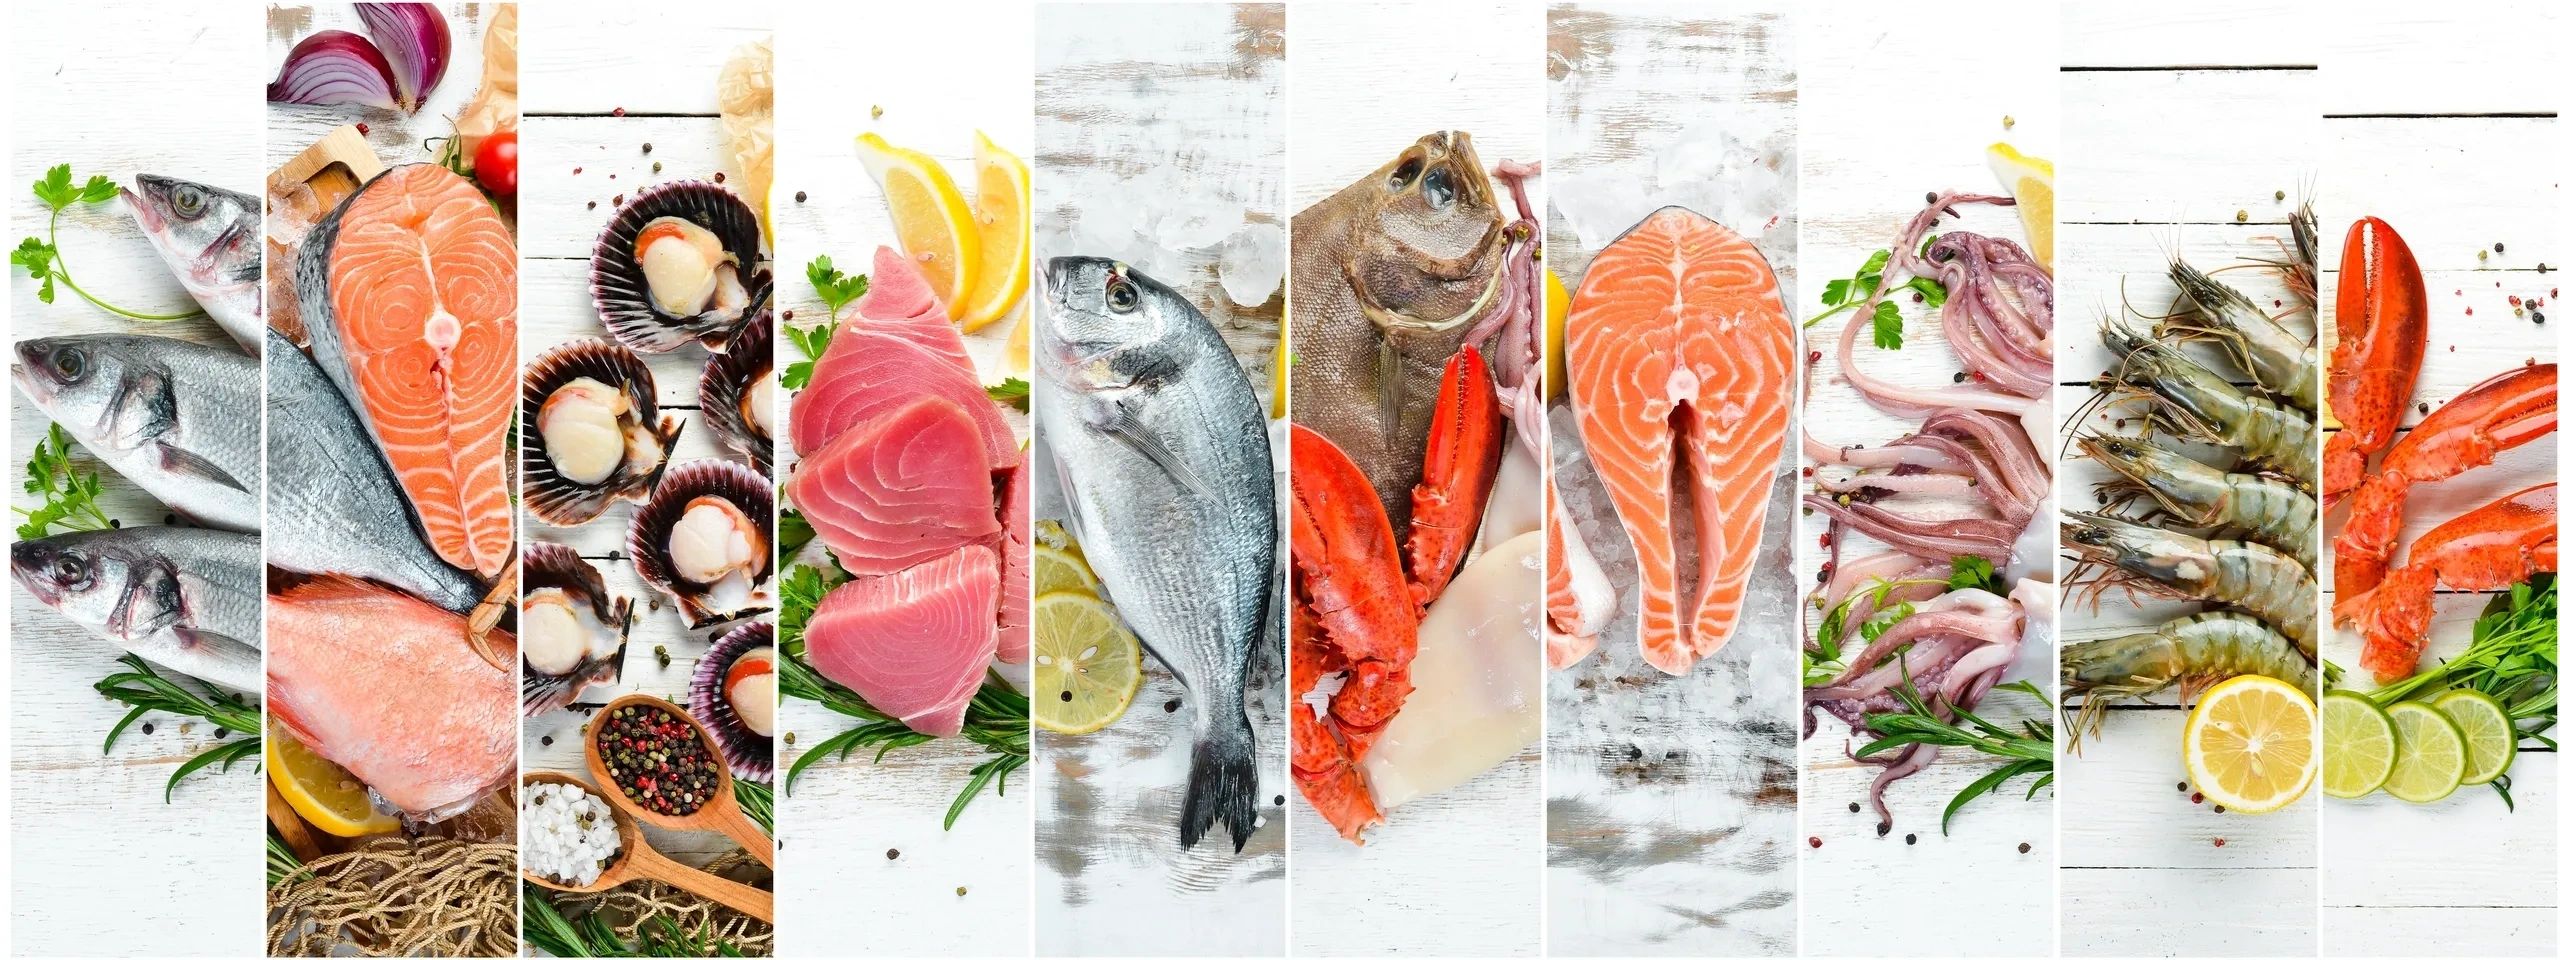 FROZEN FISH AND SEAFOOD _ SEACREST SEAFOOD UK LTD